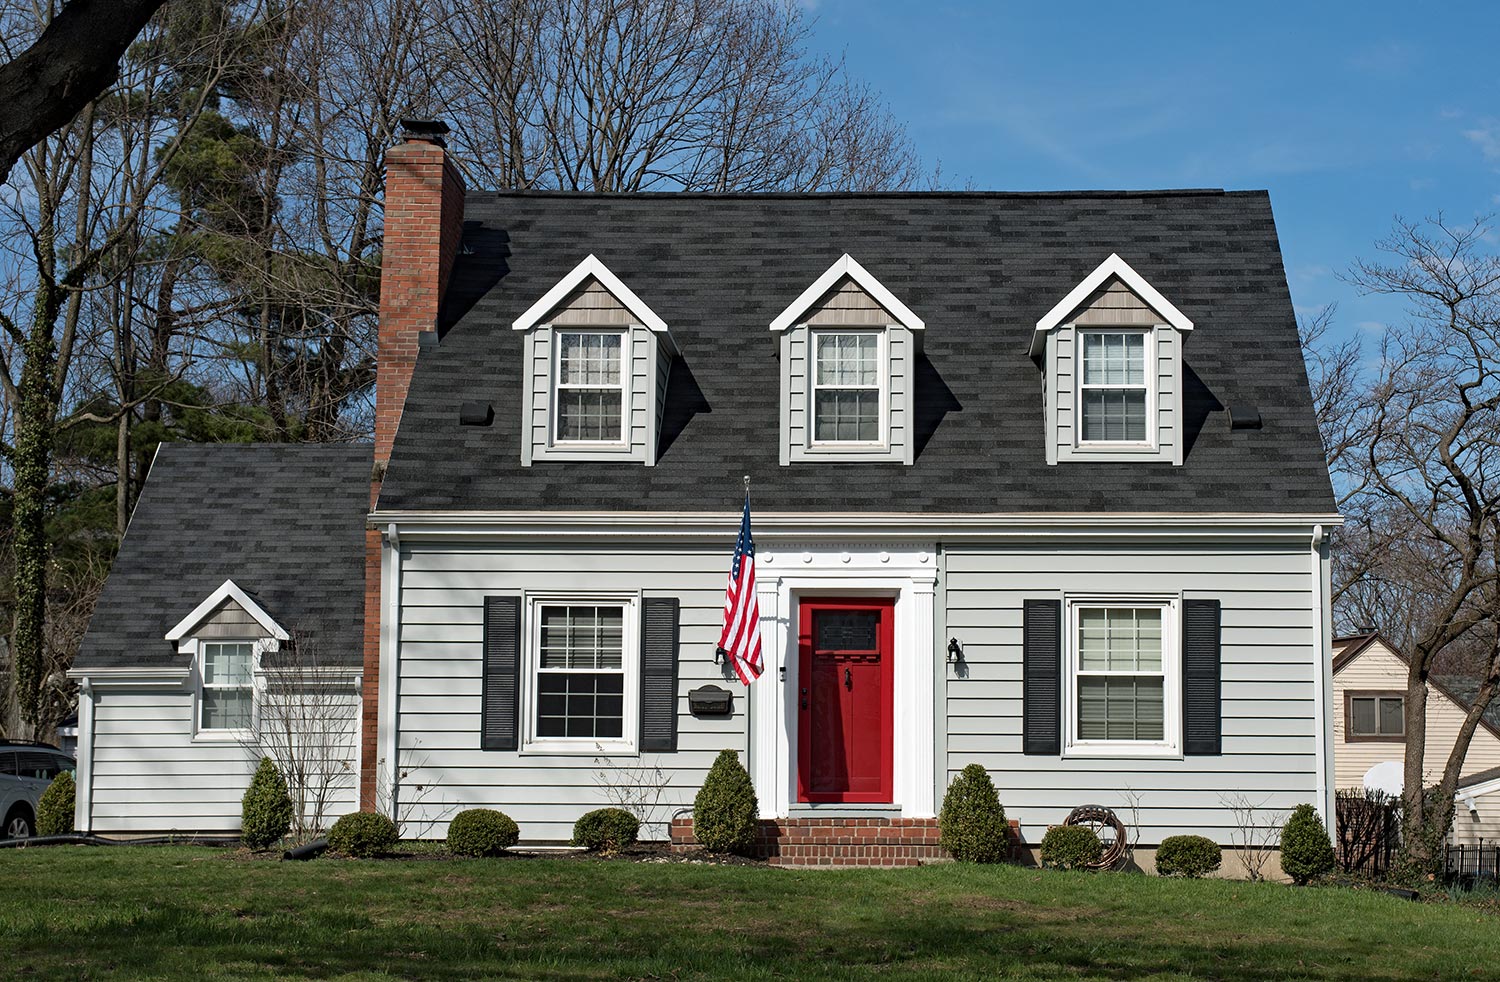 Cape cod house with three dormers & red door